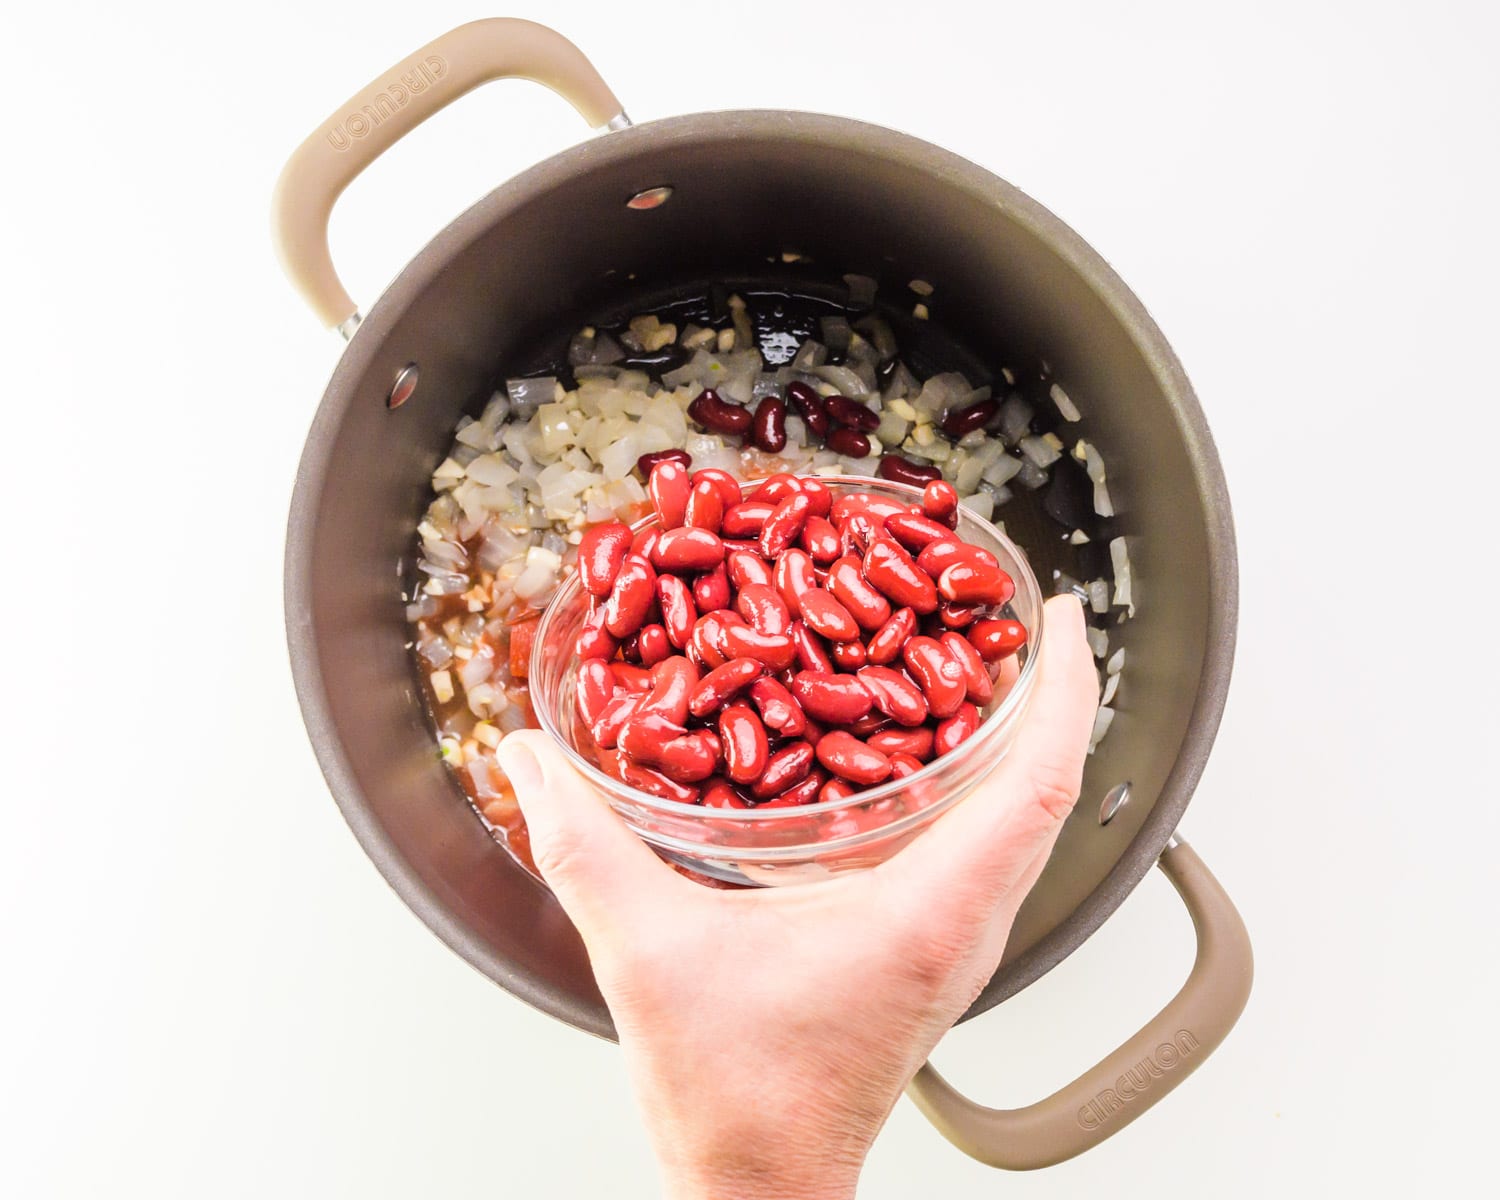 A hand holds a bowl of red kidney beans, pouring them into a pot with other ingredients.